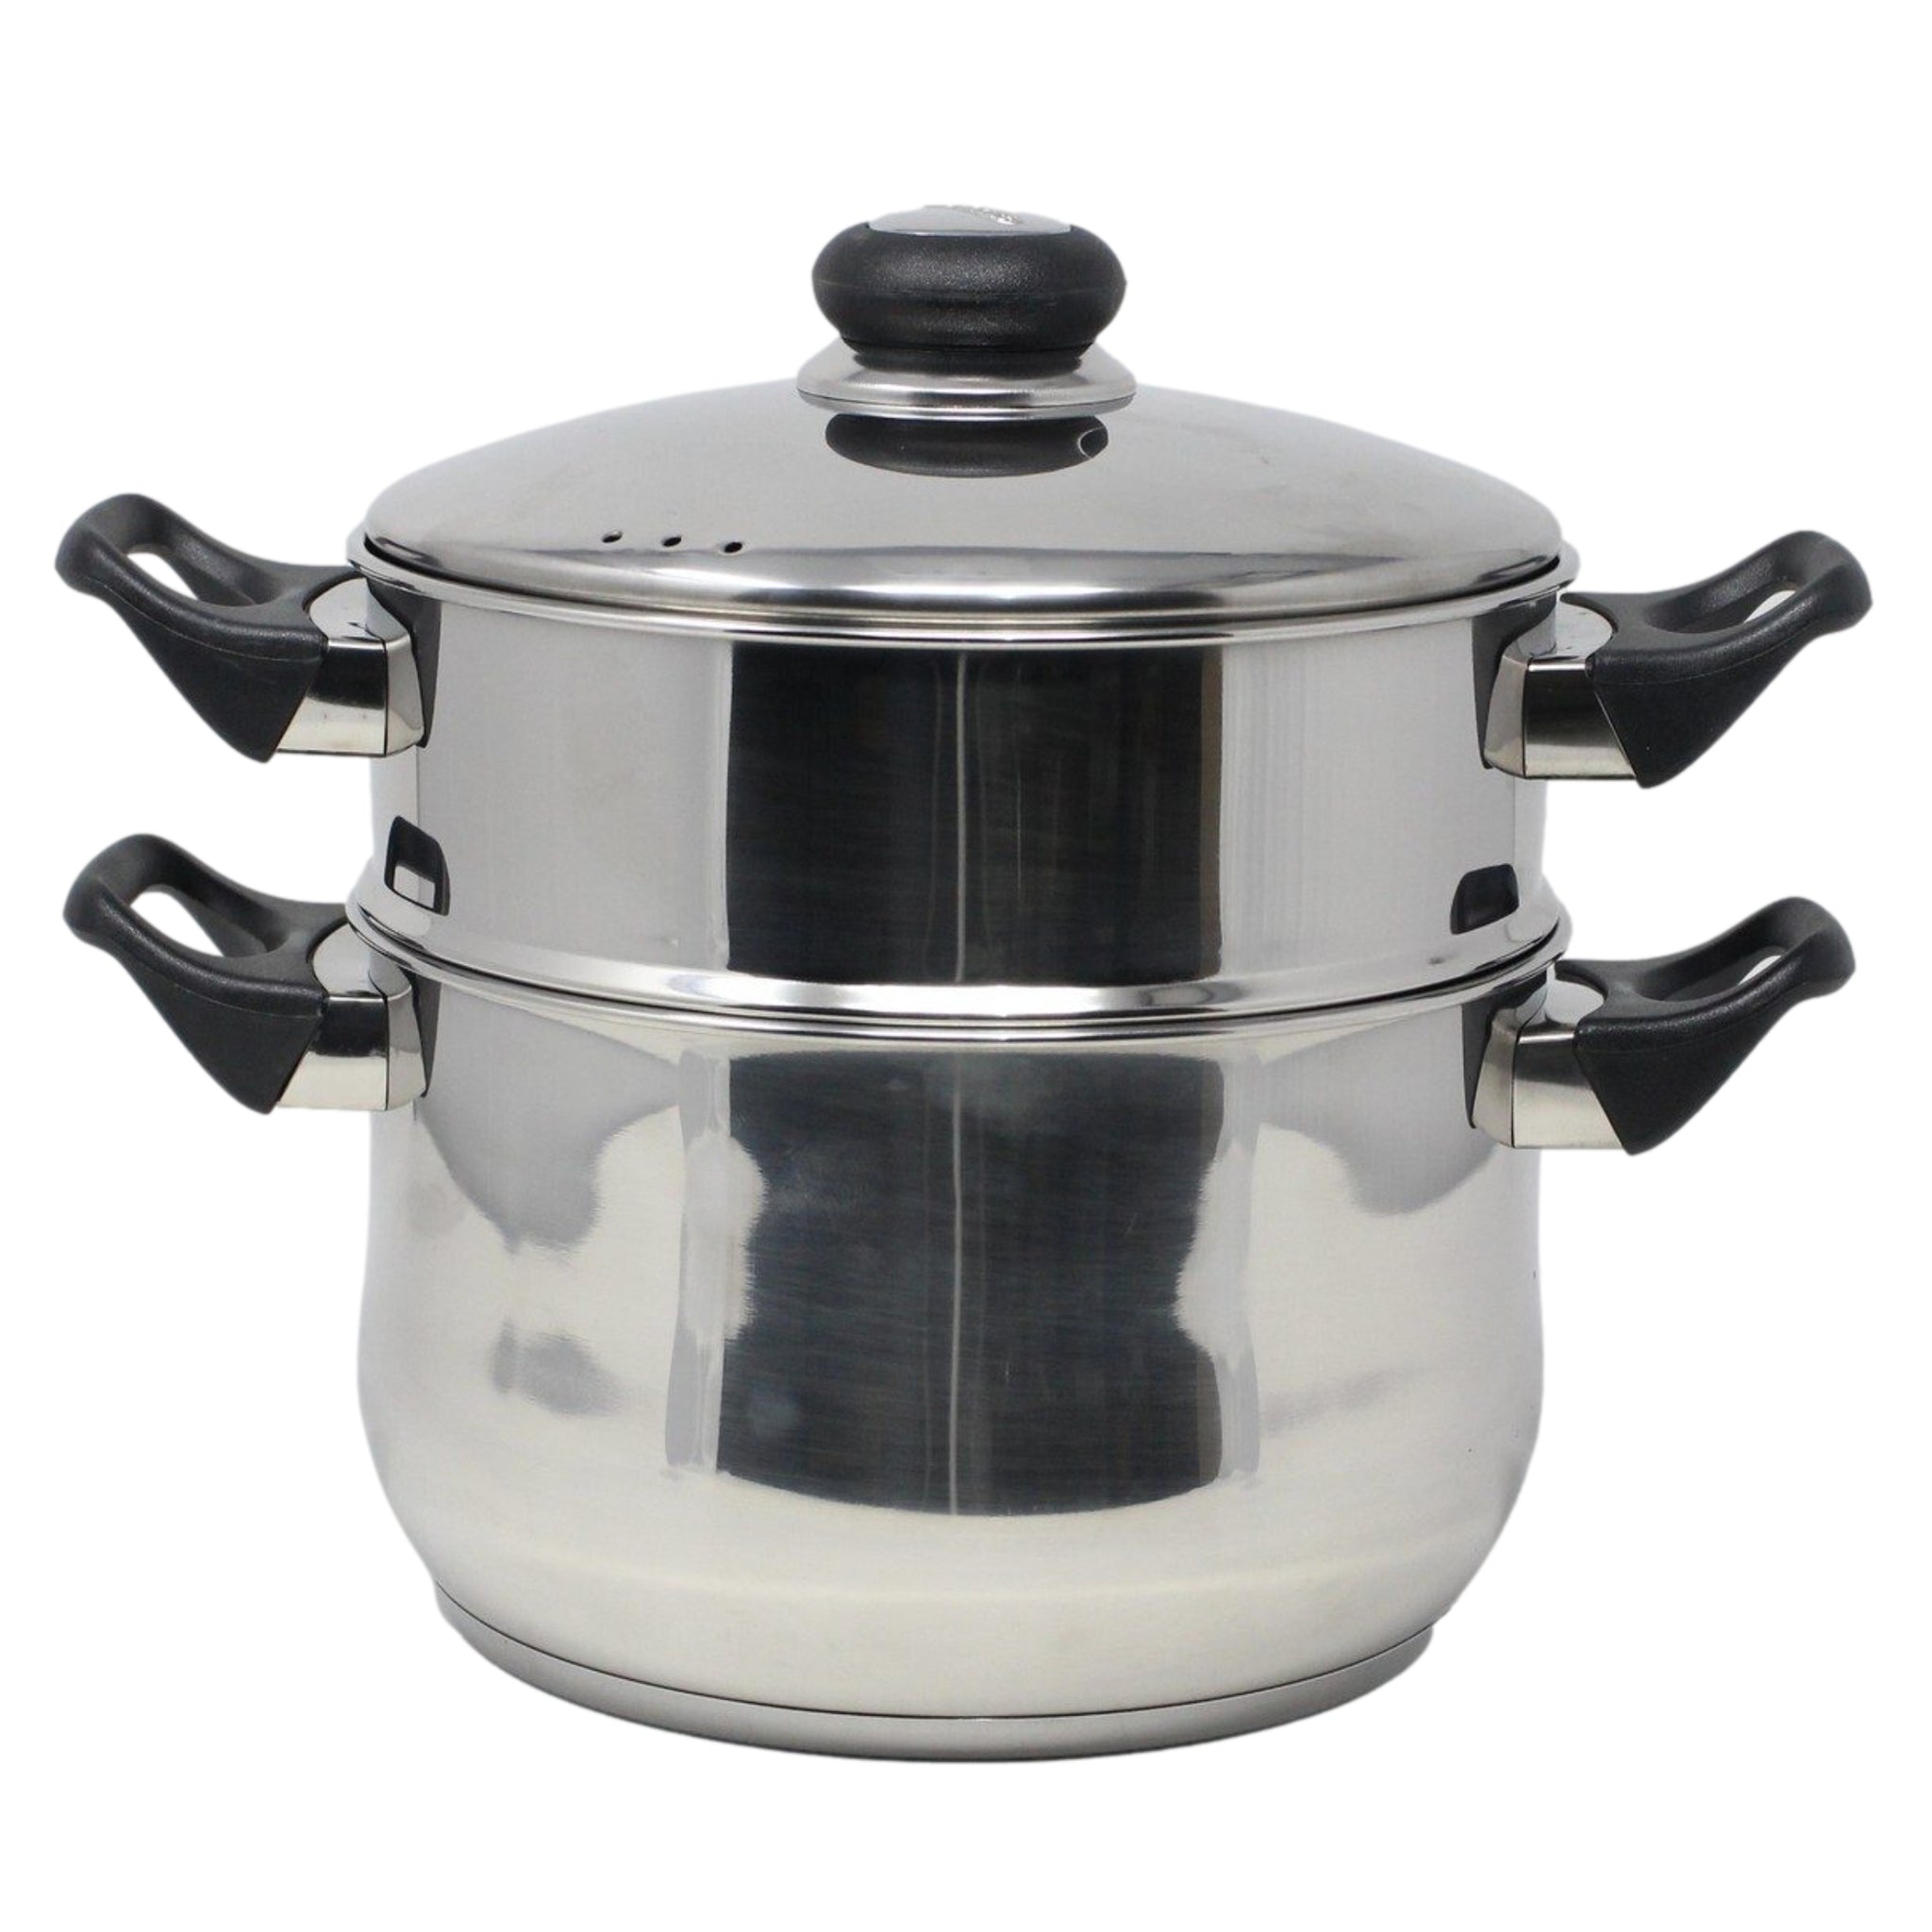 20cm 2 Tier Steamer Stainless Steel Stock Pot Induction Safe